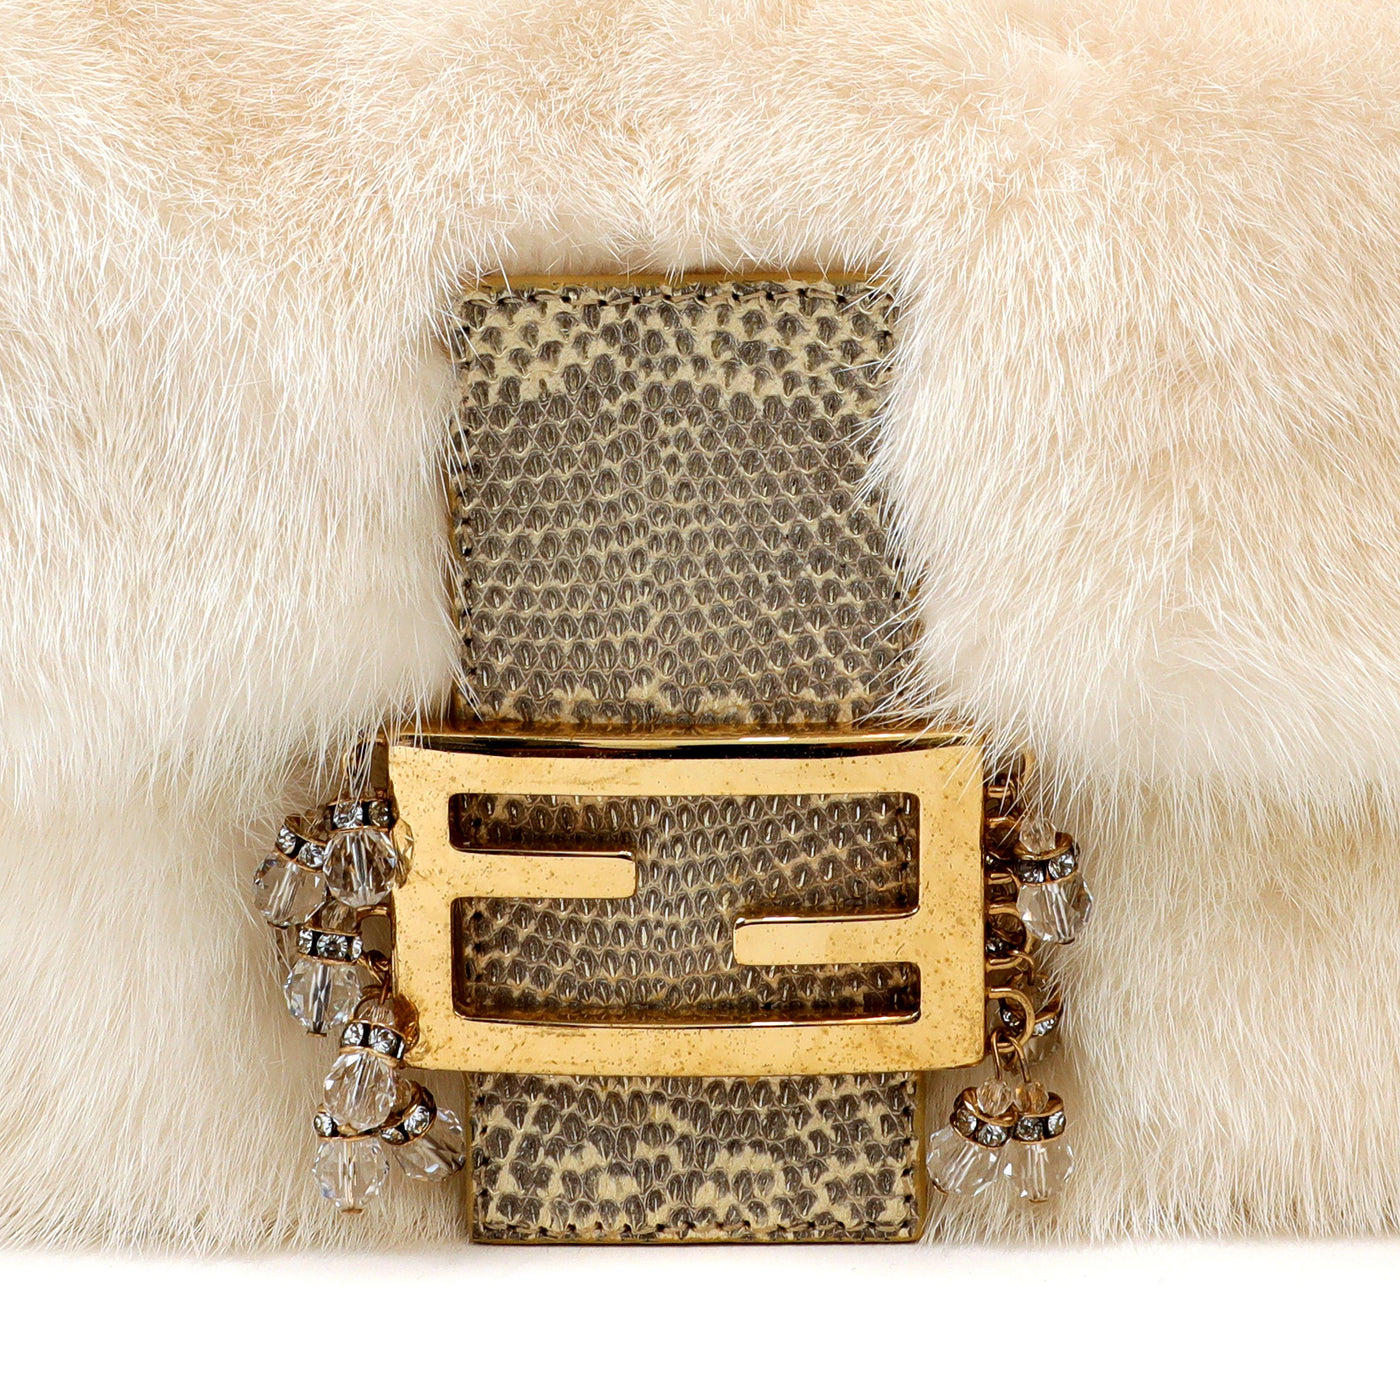 Fendi White Mink Ombre Lizard Baguette with Gold Hardware & Crystals